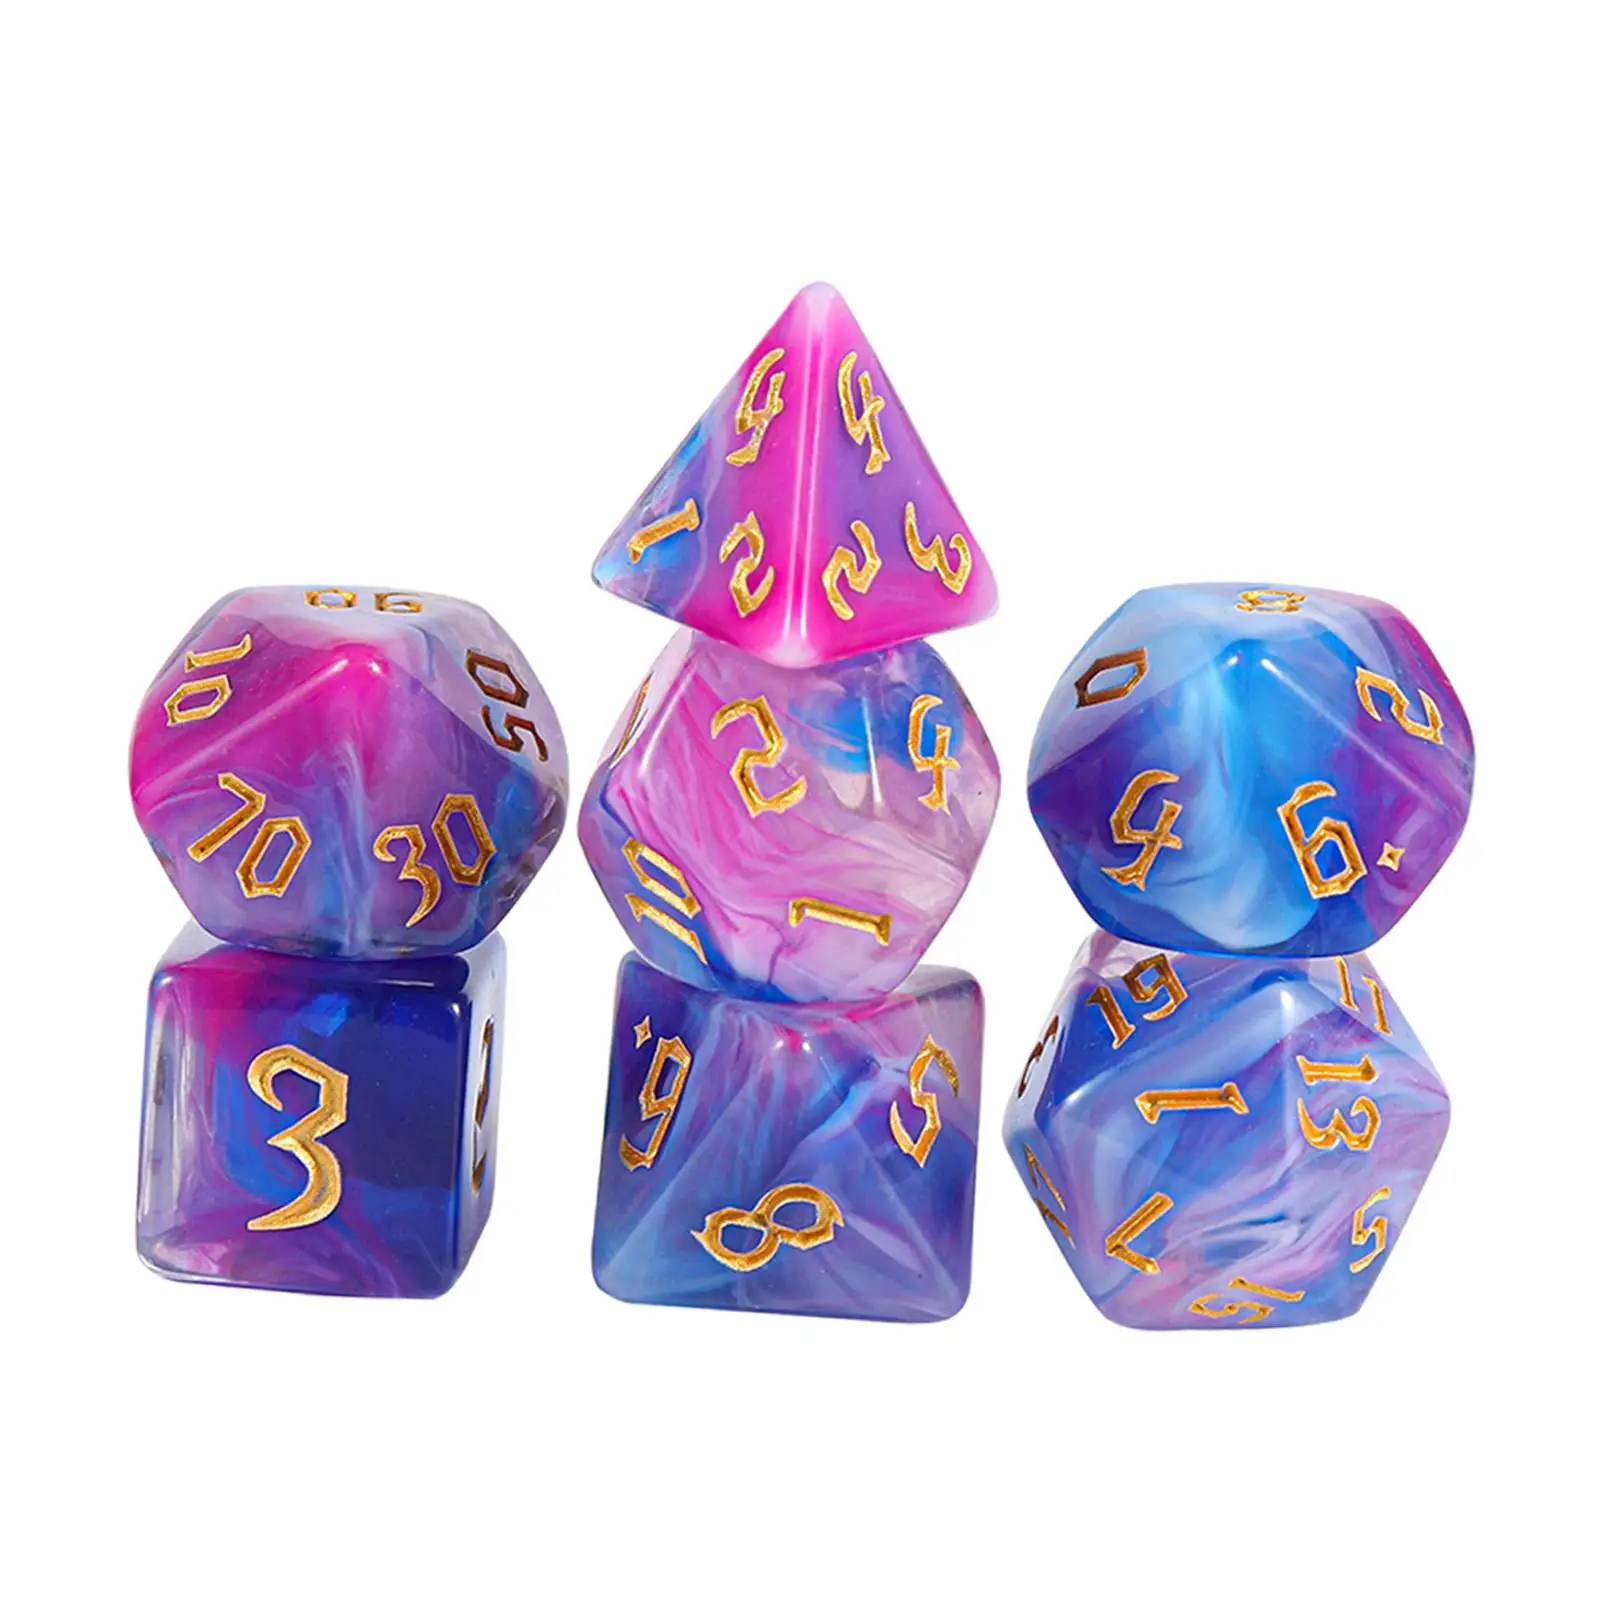 7 Pieces Polyhedral Dices Set Classroom Accessories Bar Toys D4 D8 D10 D12 D20 Dices for Role Playing Card Games Math Teaching